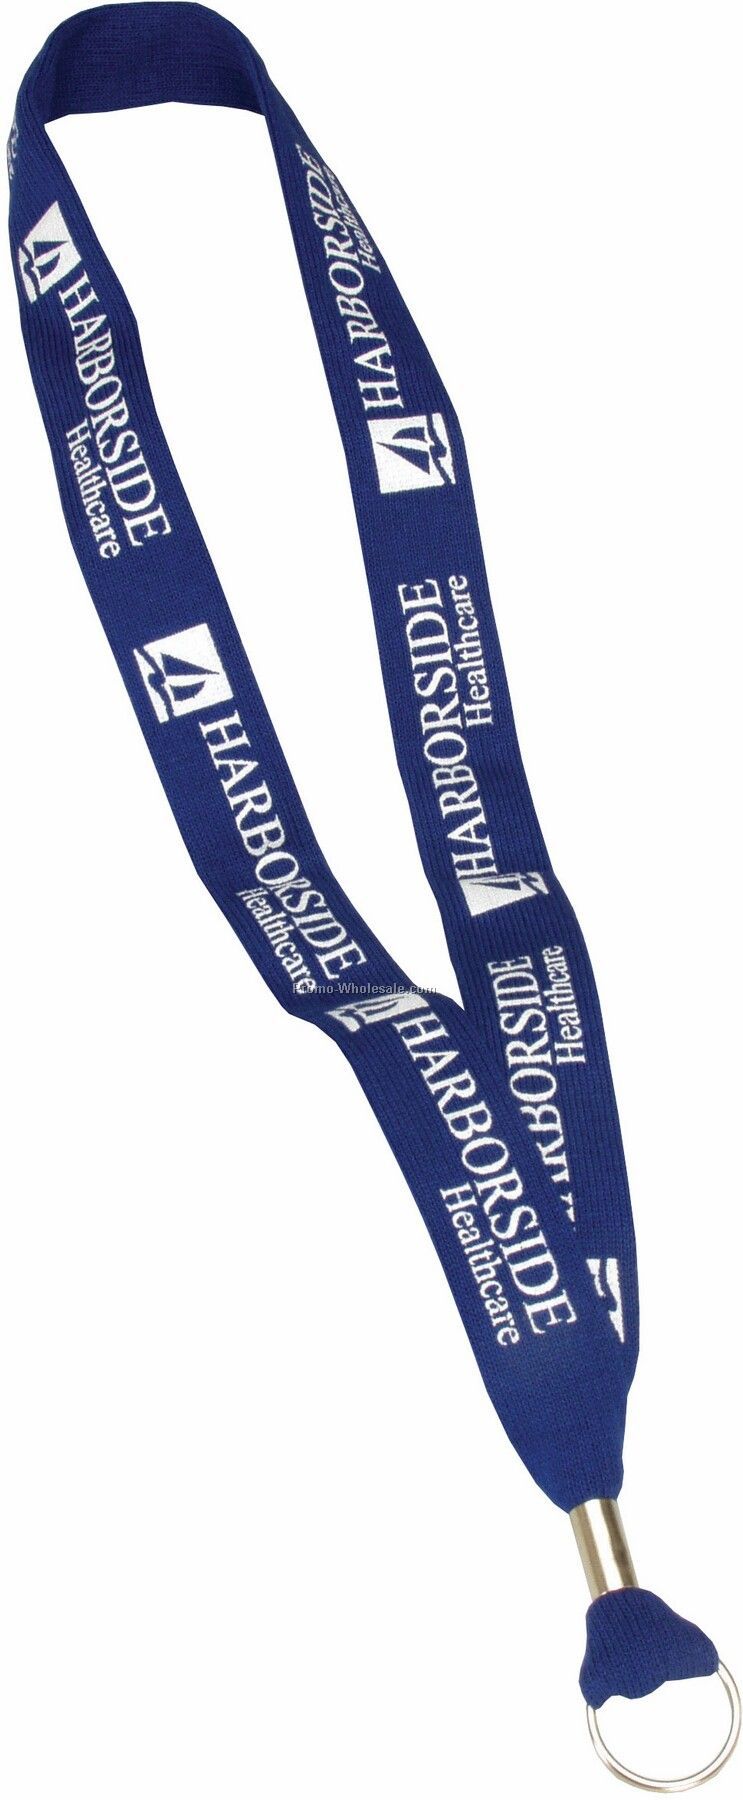 1"x34" 2 Ply Cotton Lanyards - Next Day